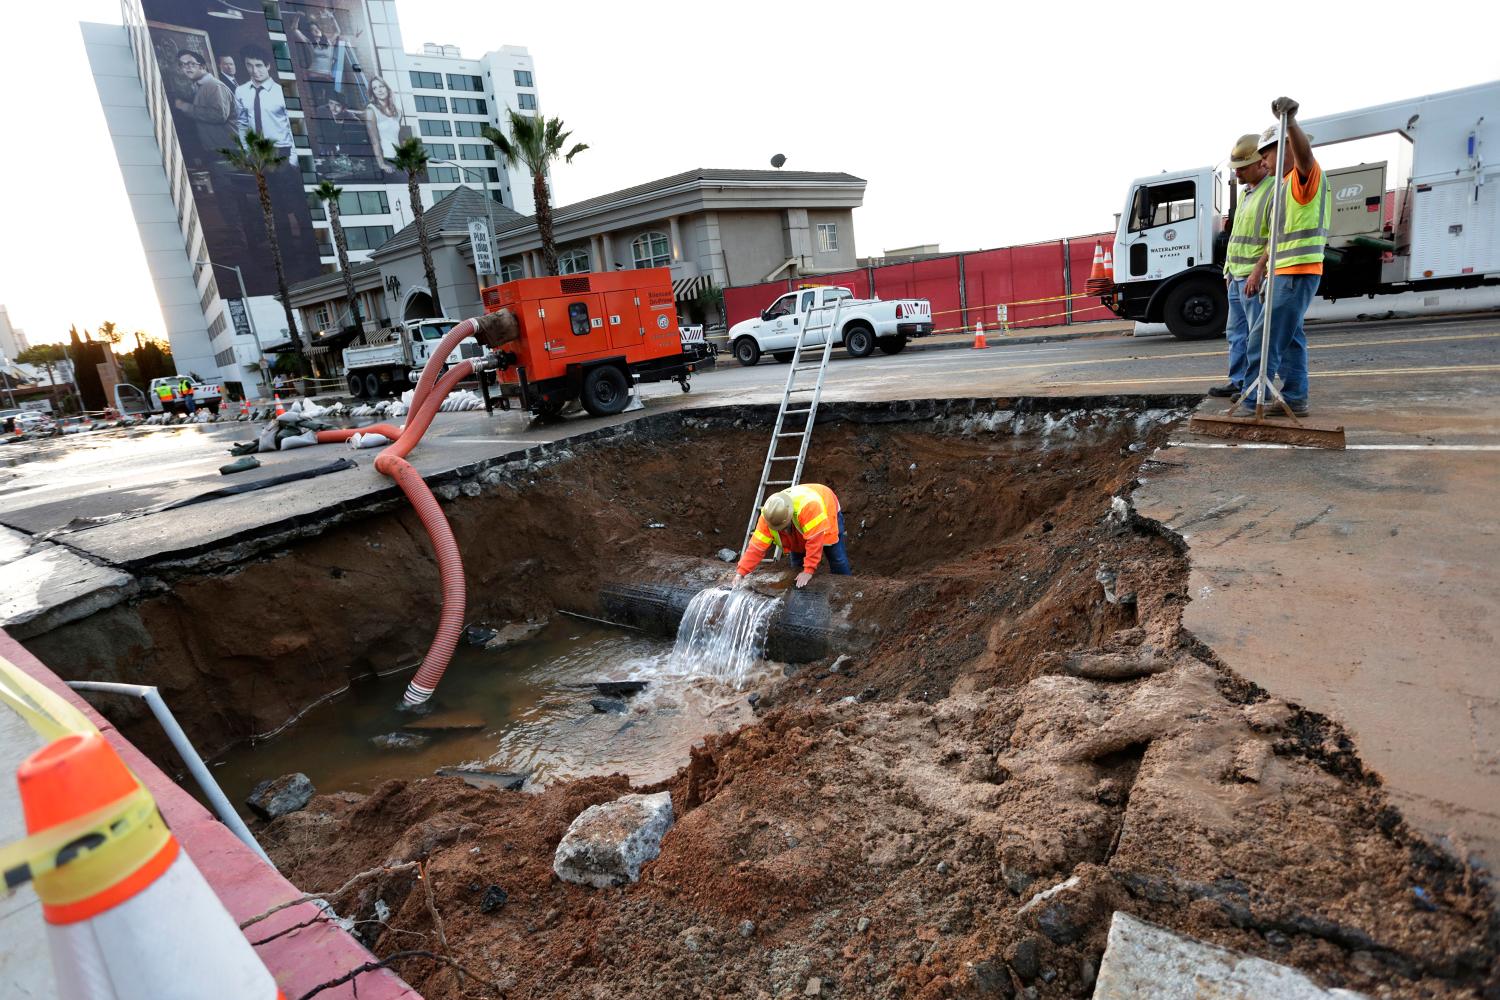 REUTERS/Jonathan Alcorn- A Los Angeles Department of Water and Power worker looks at the source of a major water main break on Sunset Boulevard in West Hollywood, Los Angeles, California September 27, 2014. A large water pipe burst under West Hollywood on Friday, flooding the famed Sunset Strip and forcing authorities to shut down the thoroughfare to vehicle traffic during the evening rush hour.